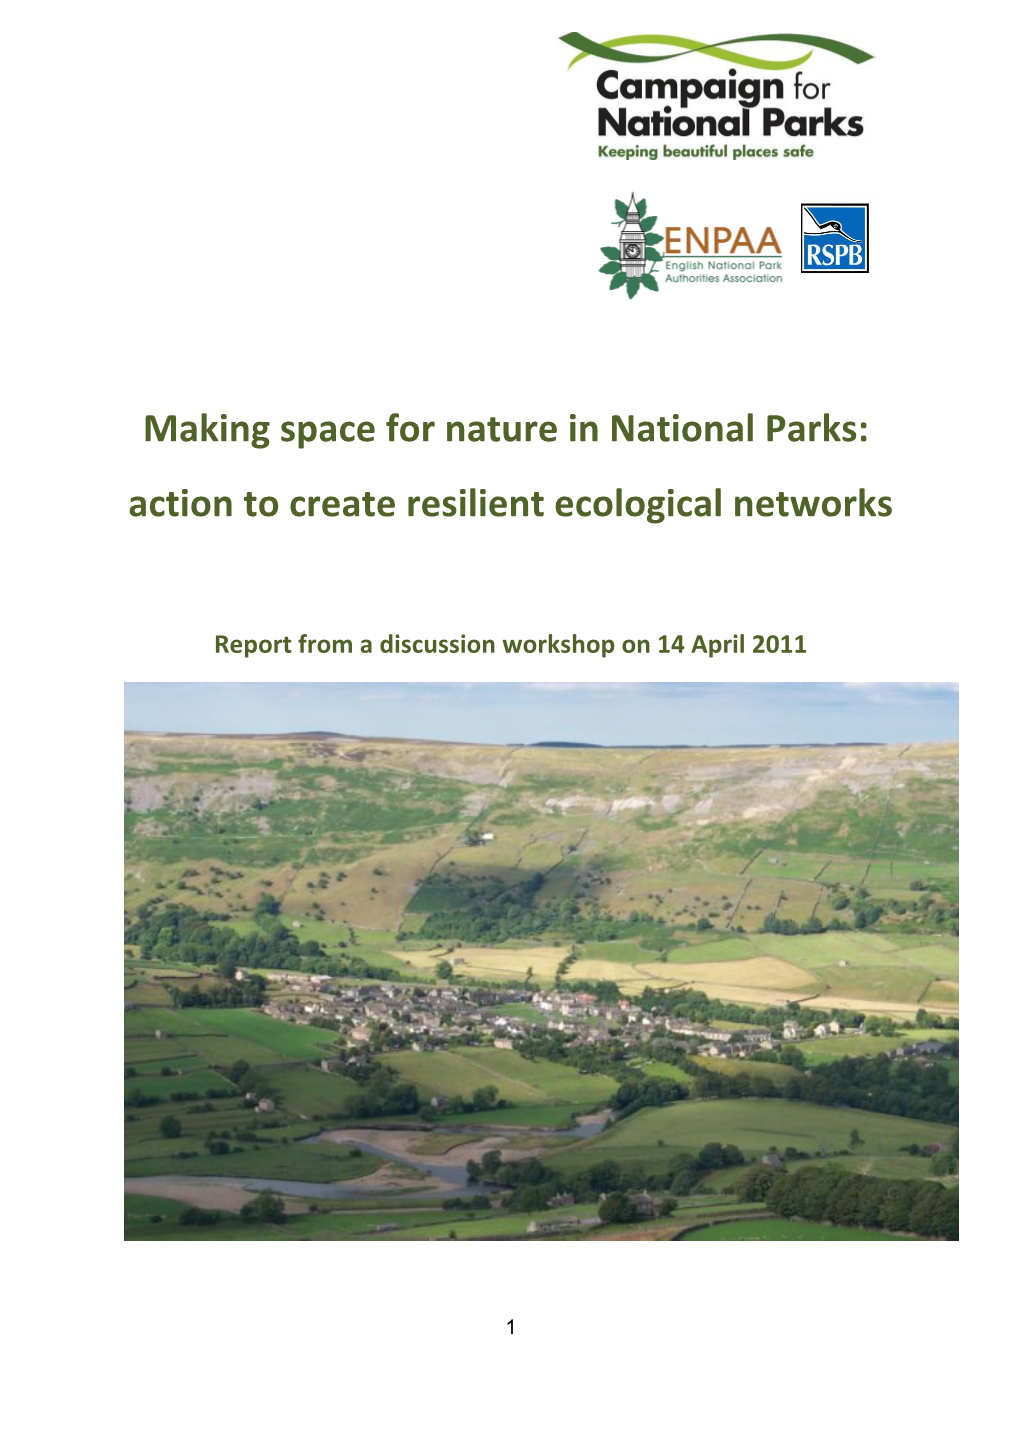 Making Space for Nature in National Parks